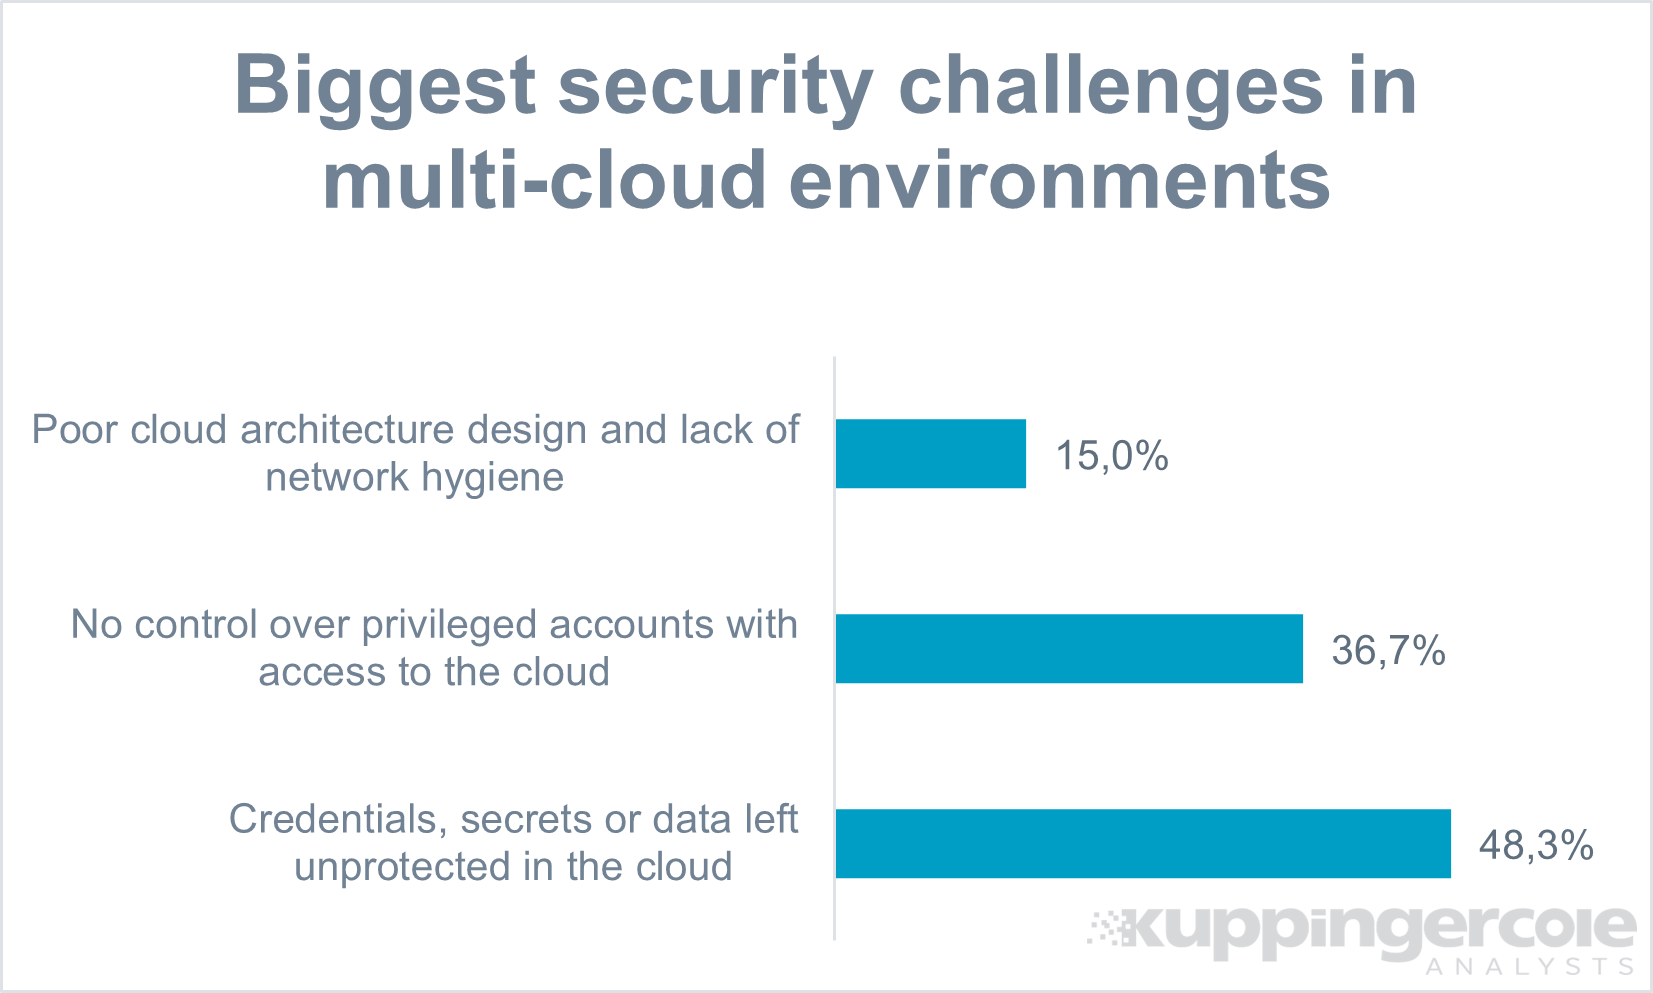 Polling demonstrates the concern buyers have about the risks in multi-cloud deployments